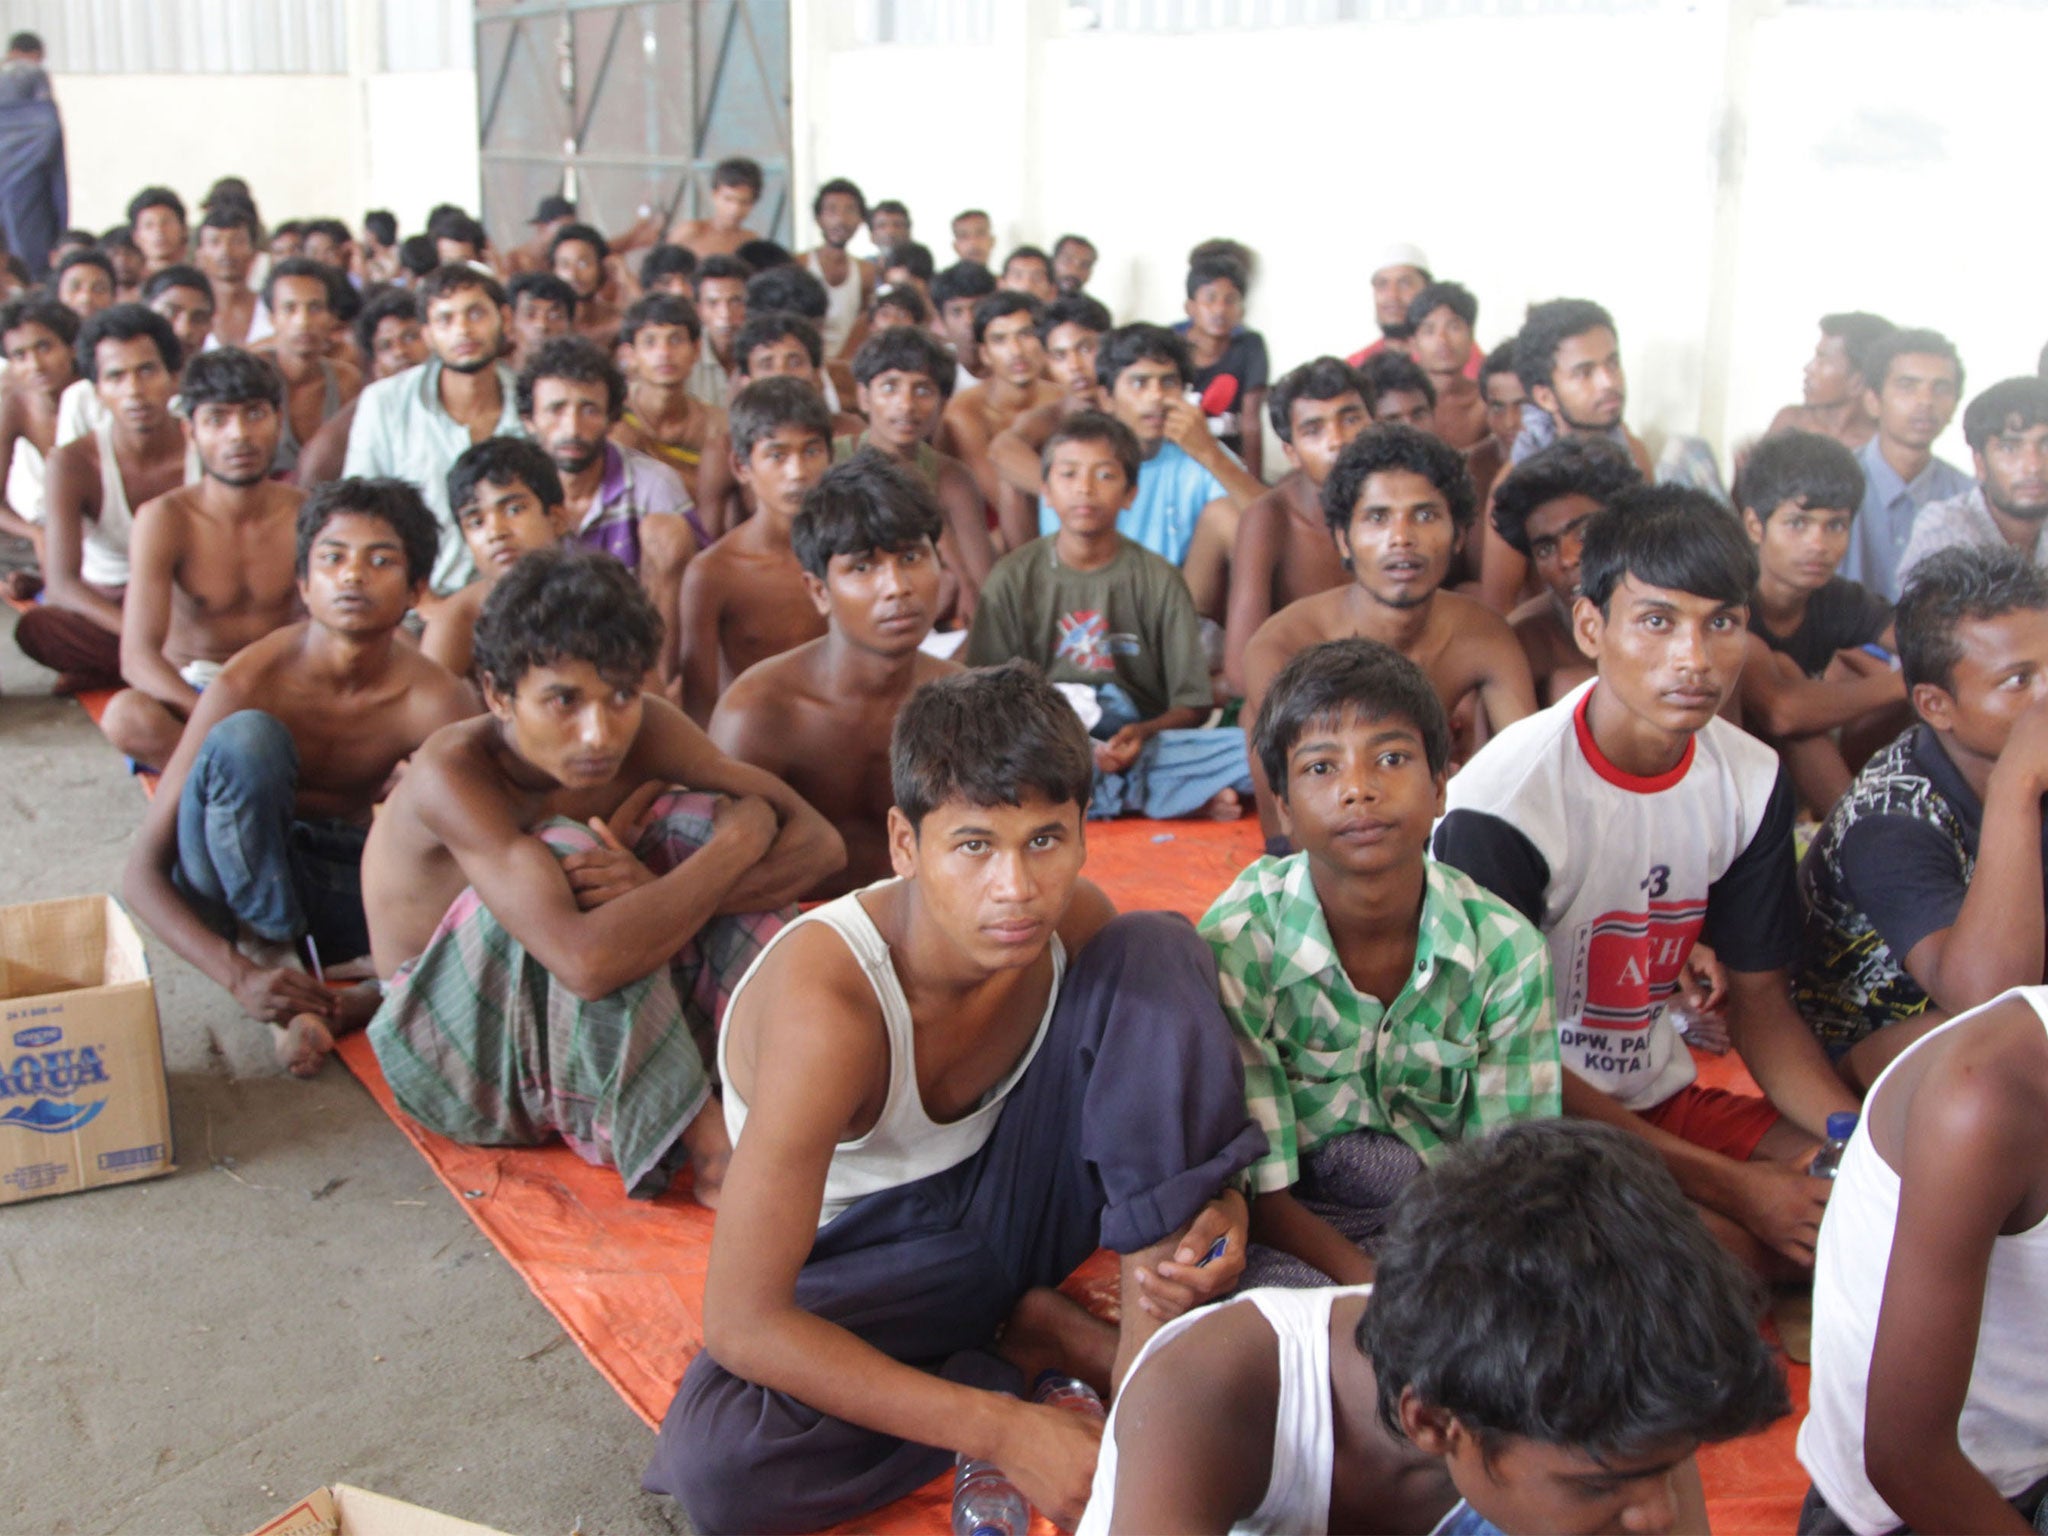 The group of rescued migrants mostly Rohingya from Myanmar and Bangladesh gather on arrival at the new confinement area in the fishing town of Kuala Langsa